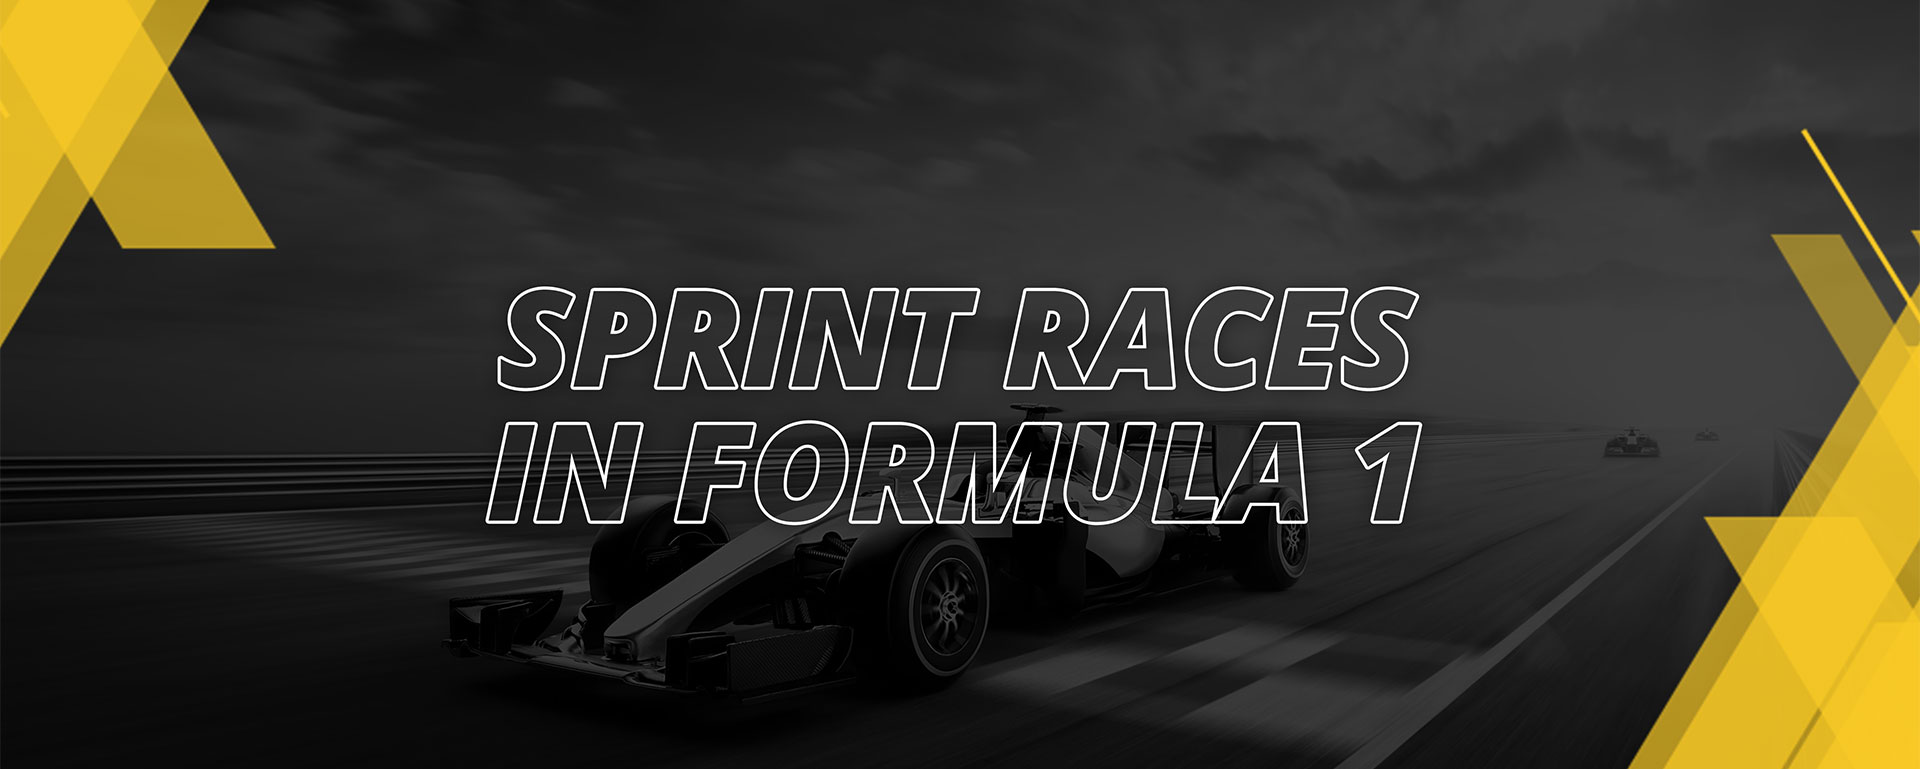 SPRINT RACES IN FORMULA 1